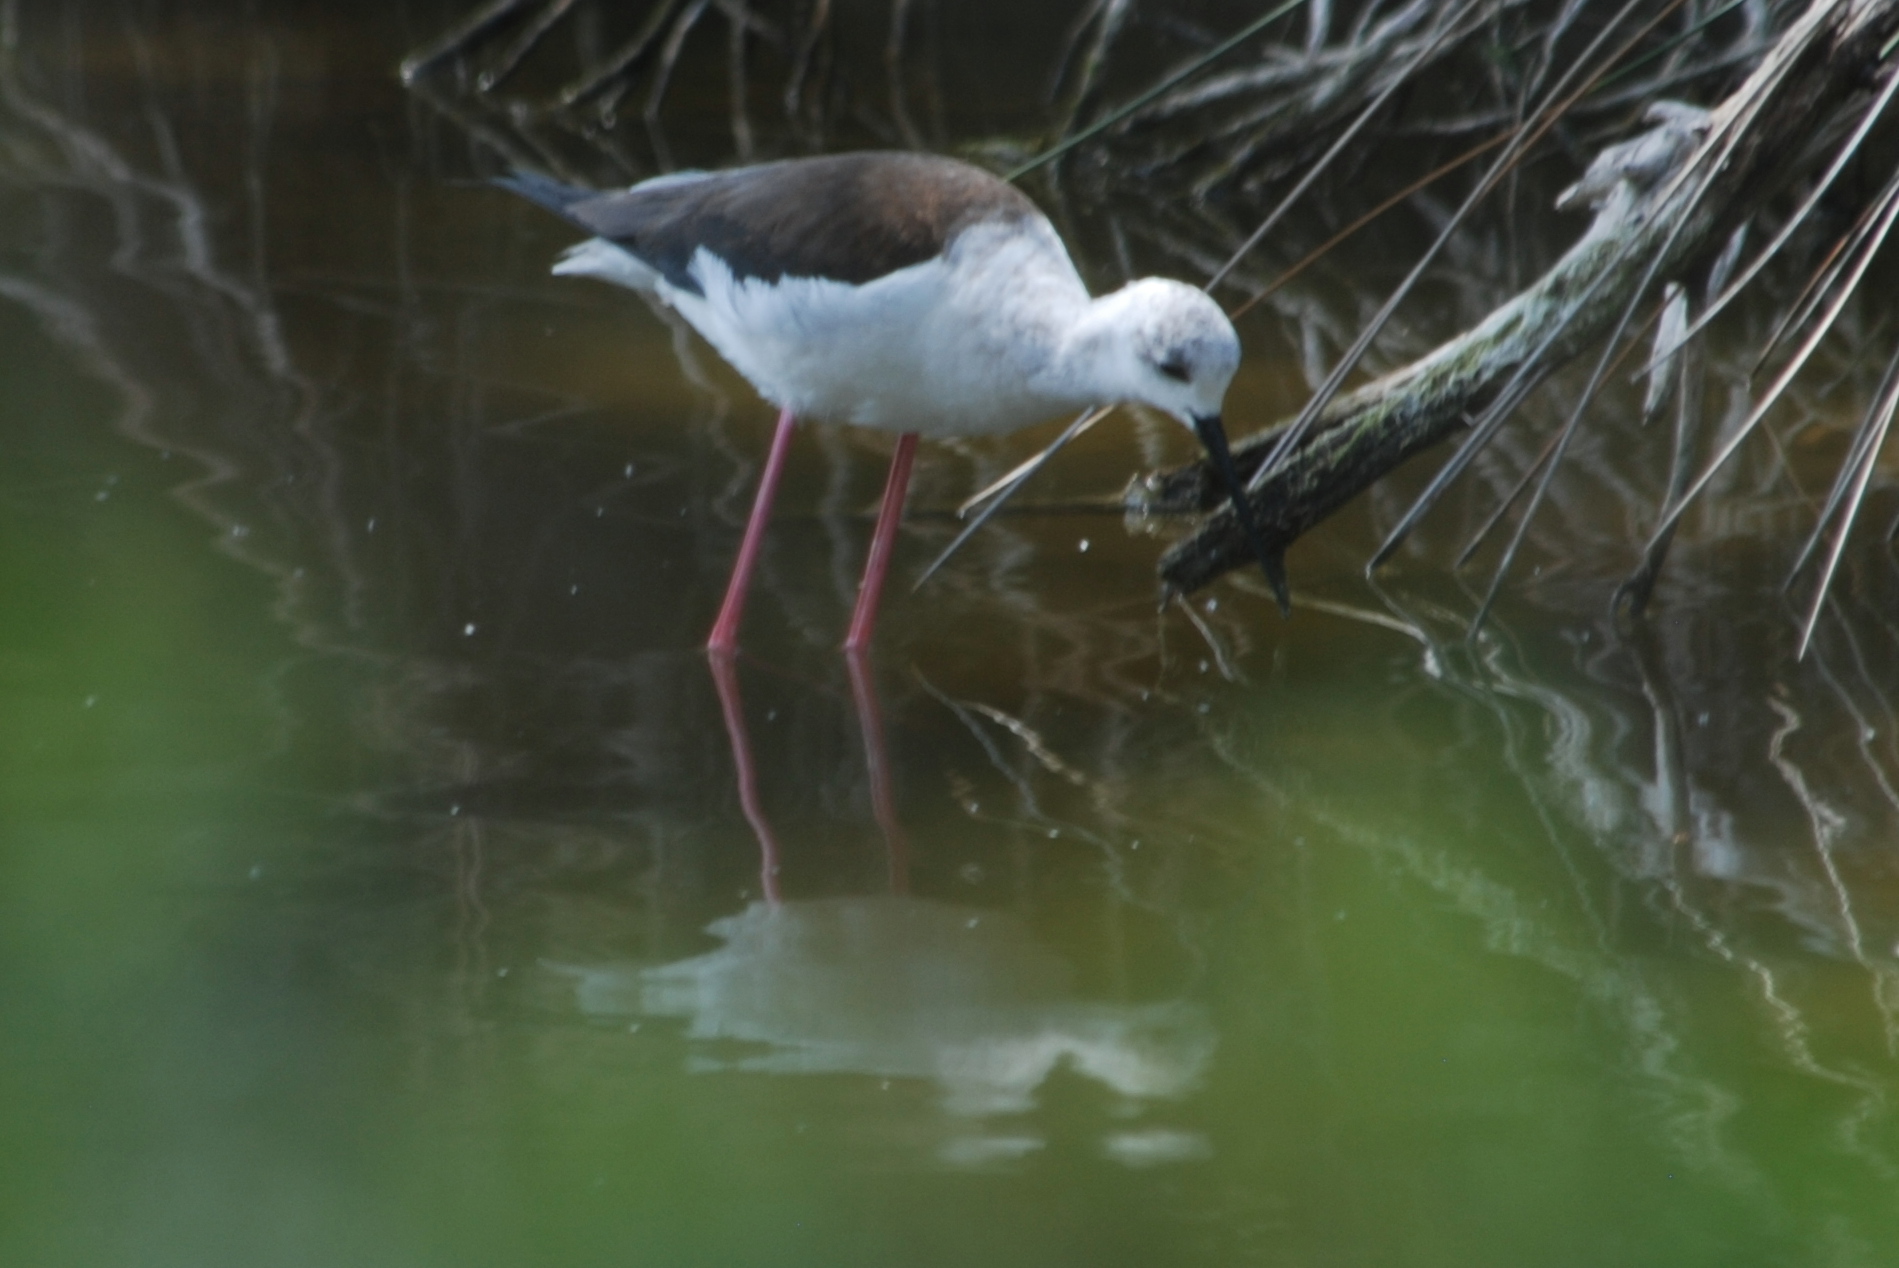 Click picture to see more Black-winged Stilts.